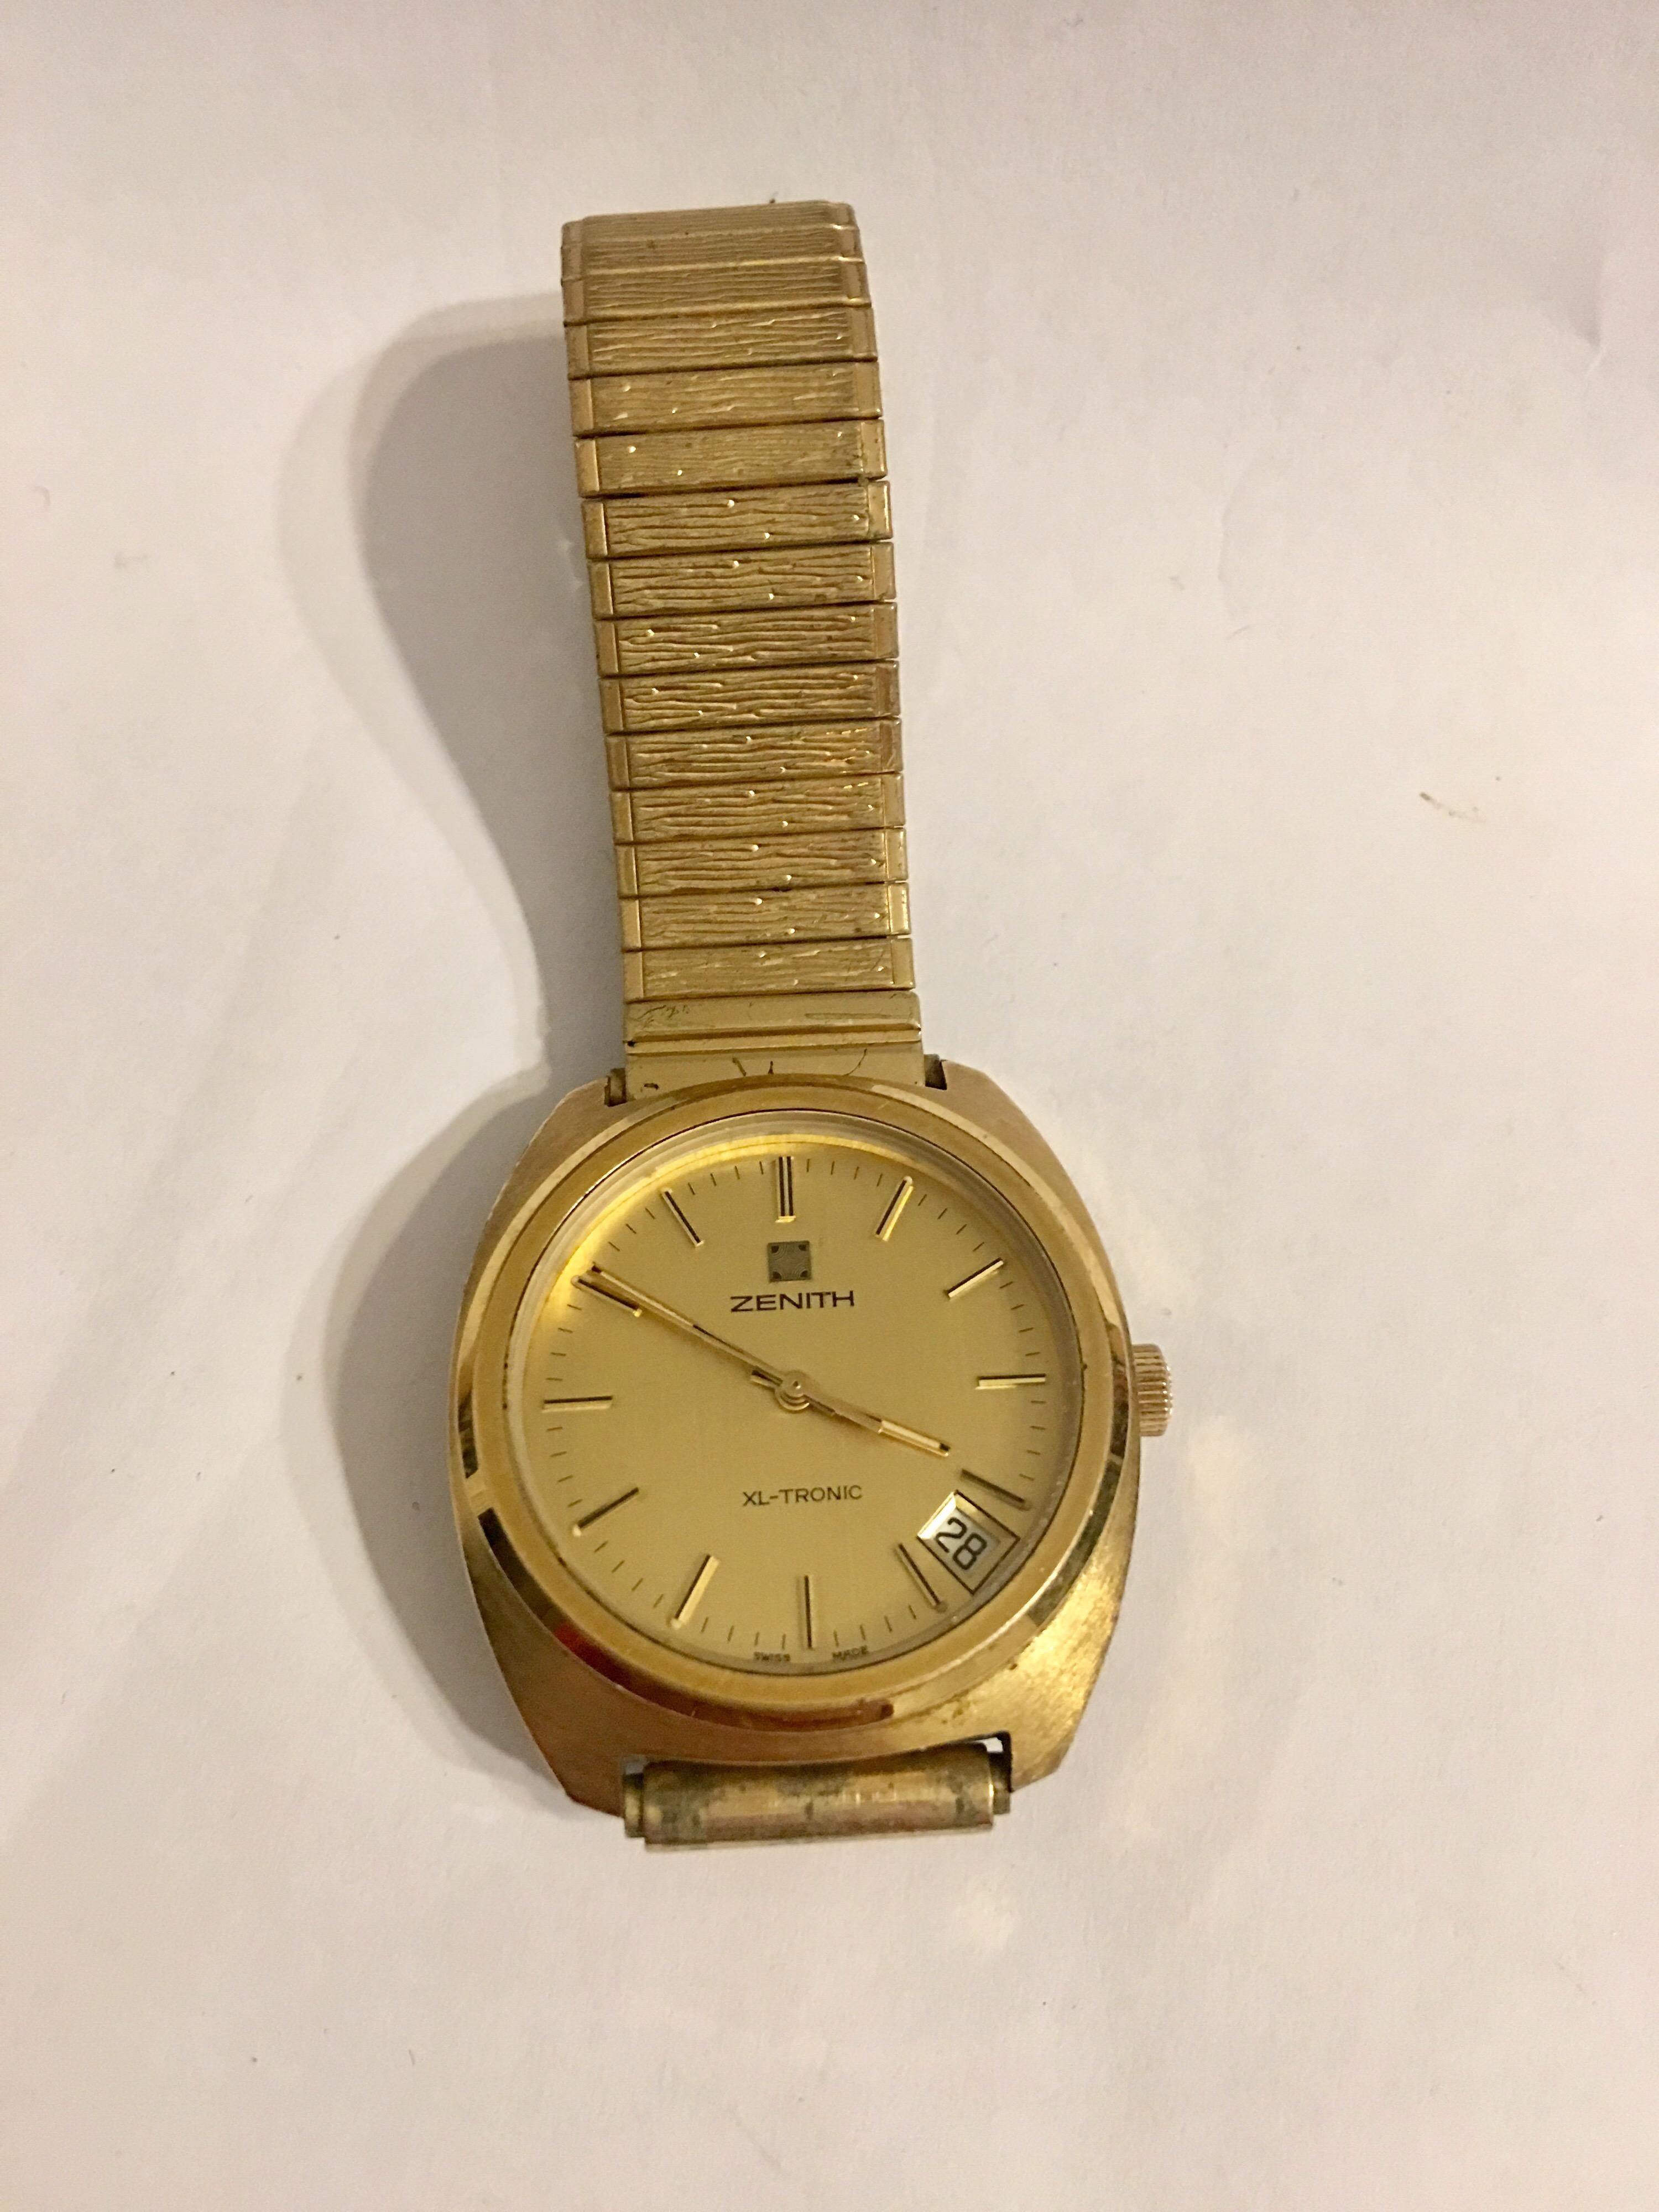 Vintage 1970s Zenith XL-Tronic Gold-Plated/ Stainless Steel Men’s Watch For Sale 6